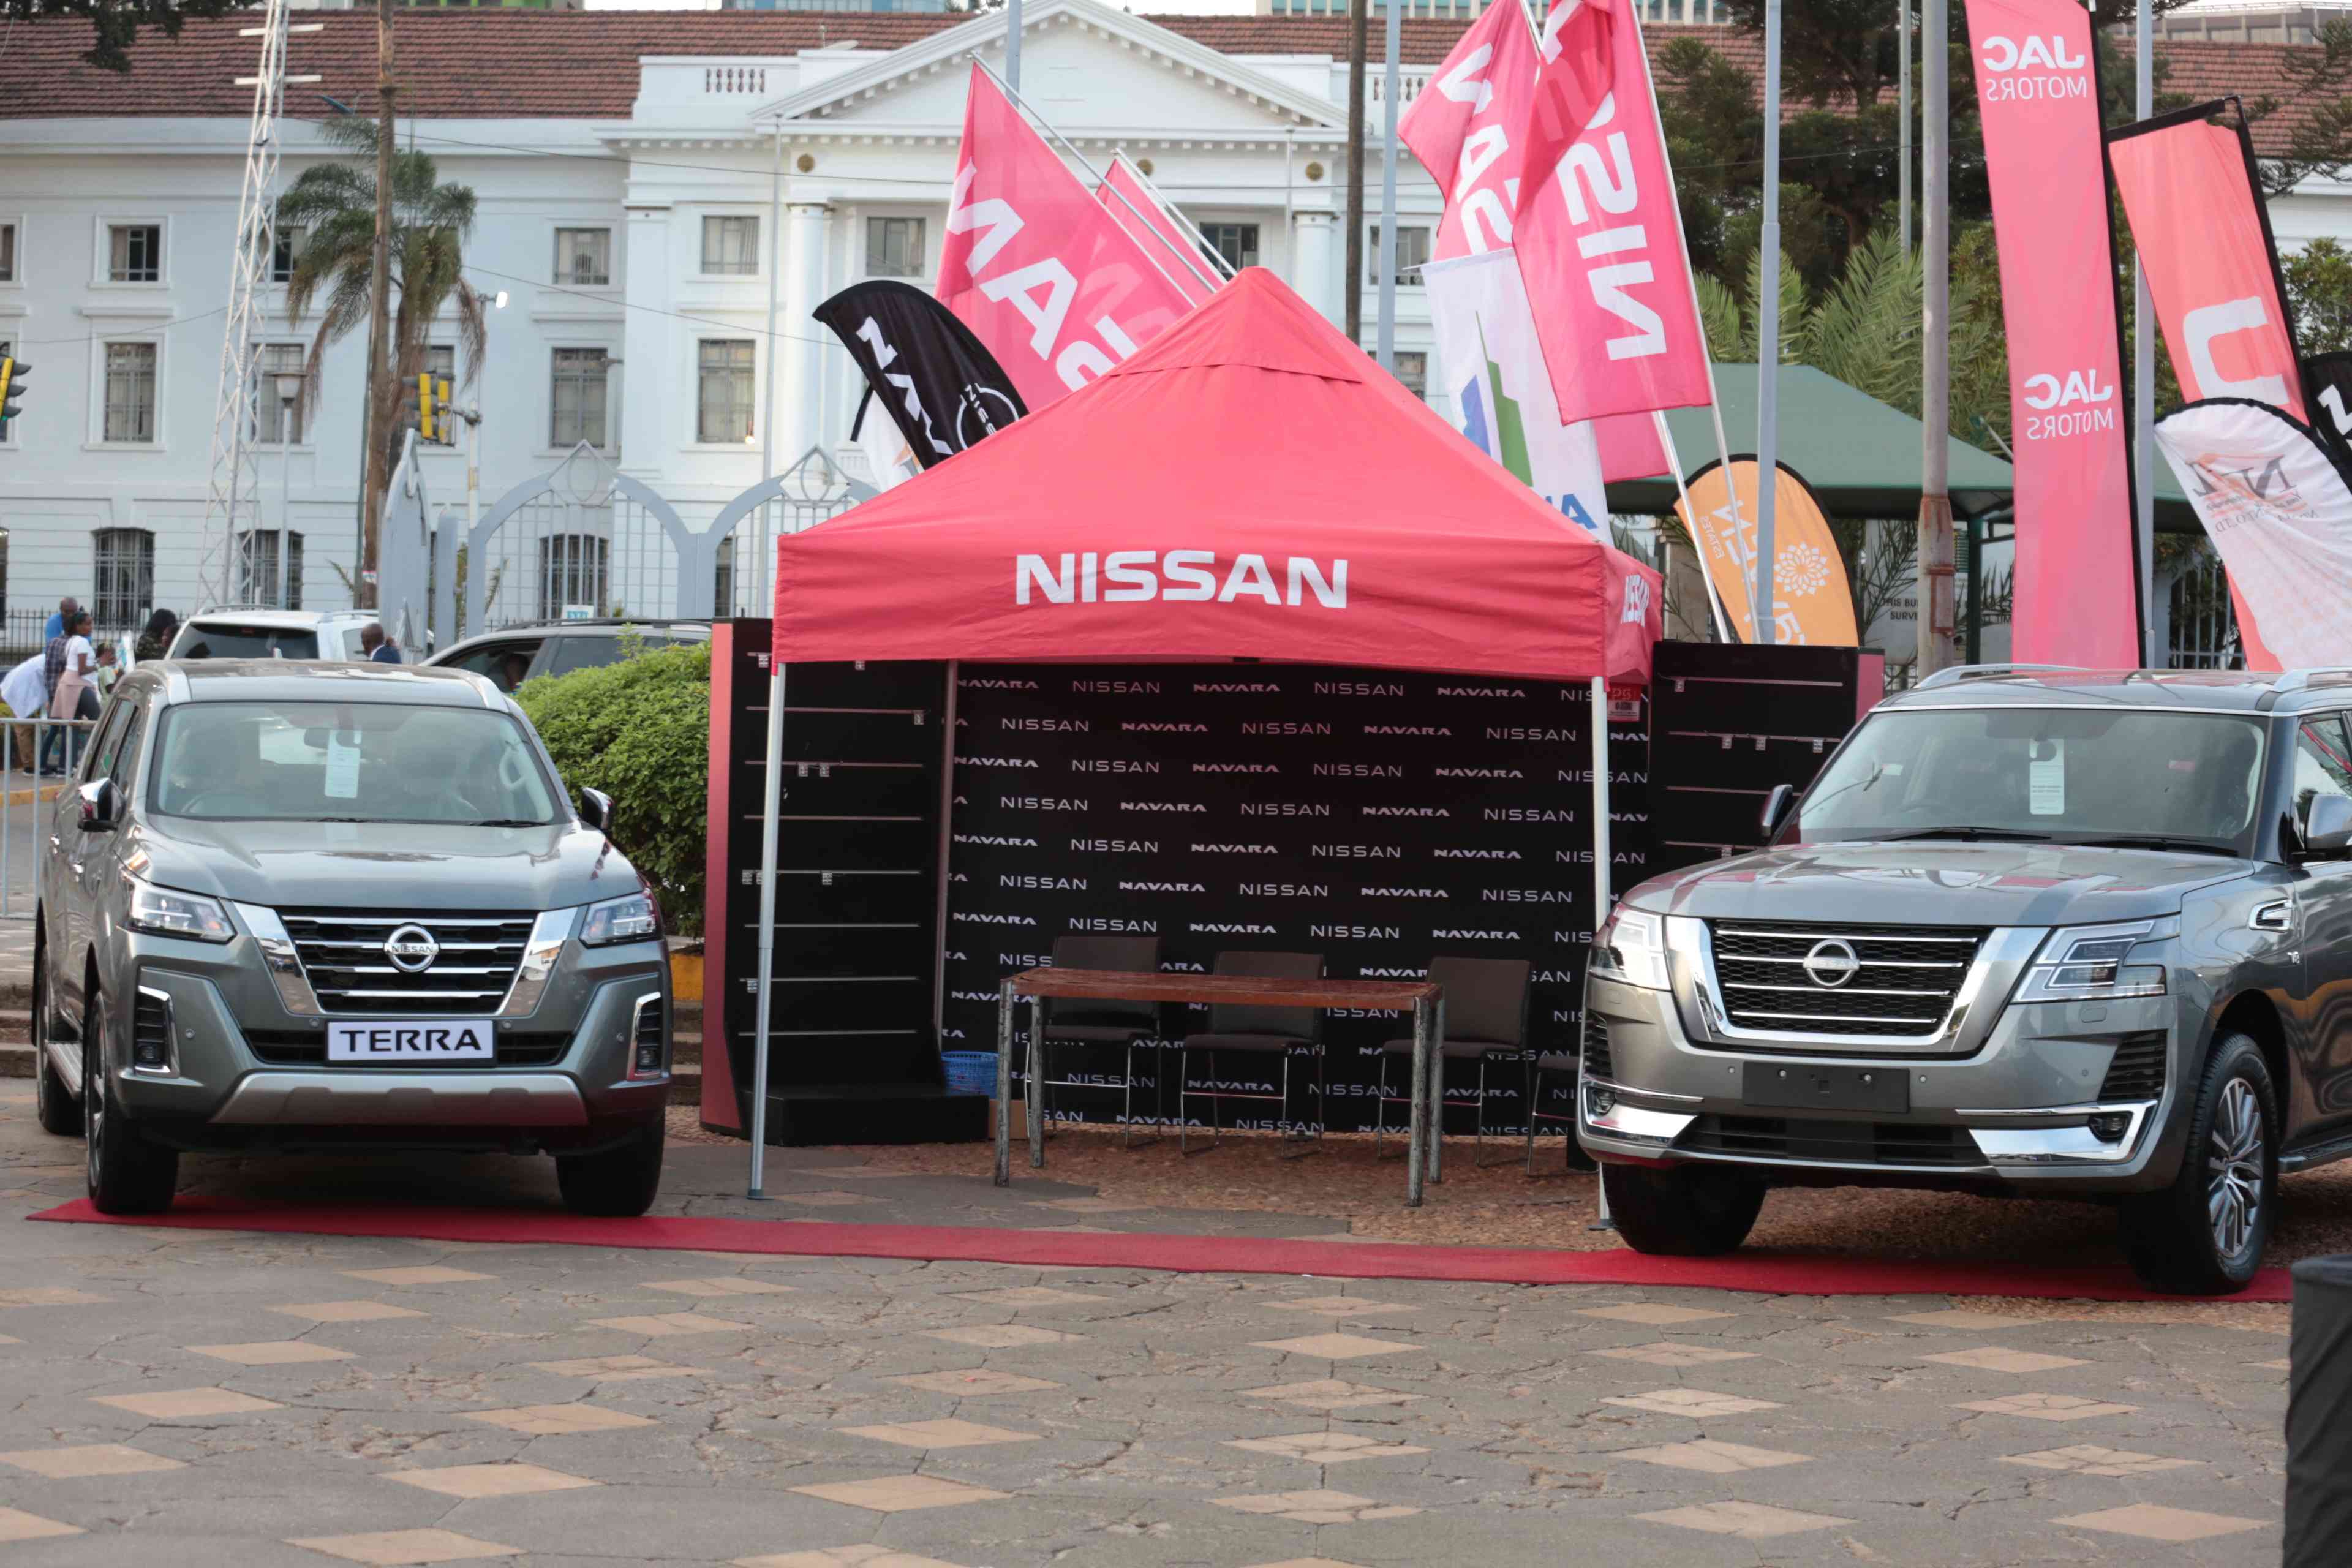 The Nissan Stage all set-up